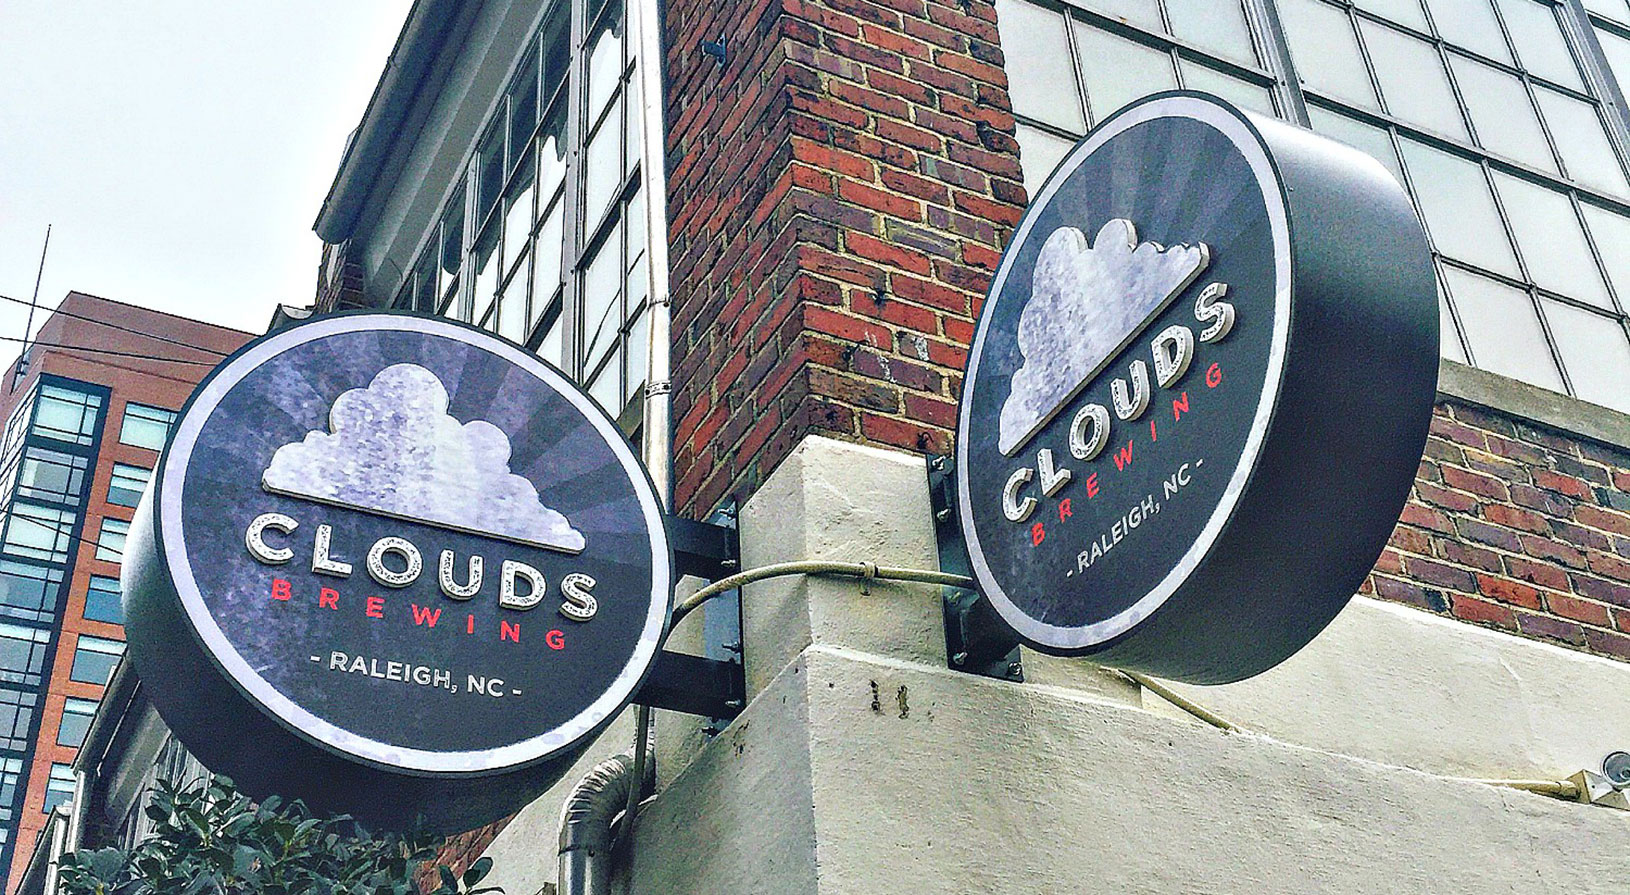 Peace Raleigh Apartments Clouds brewing logo exterior signage